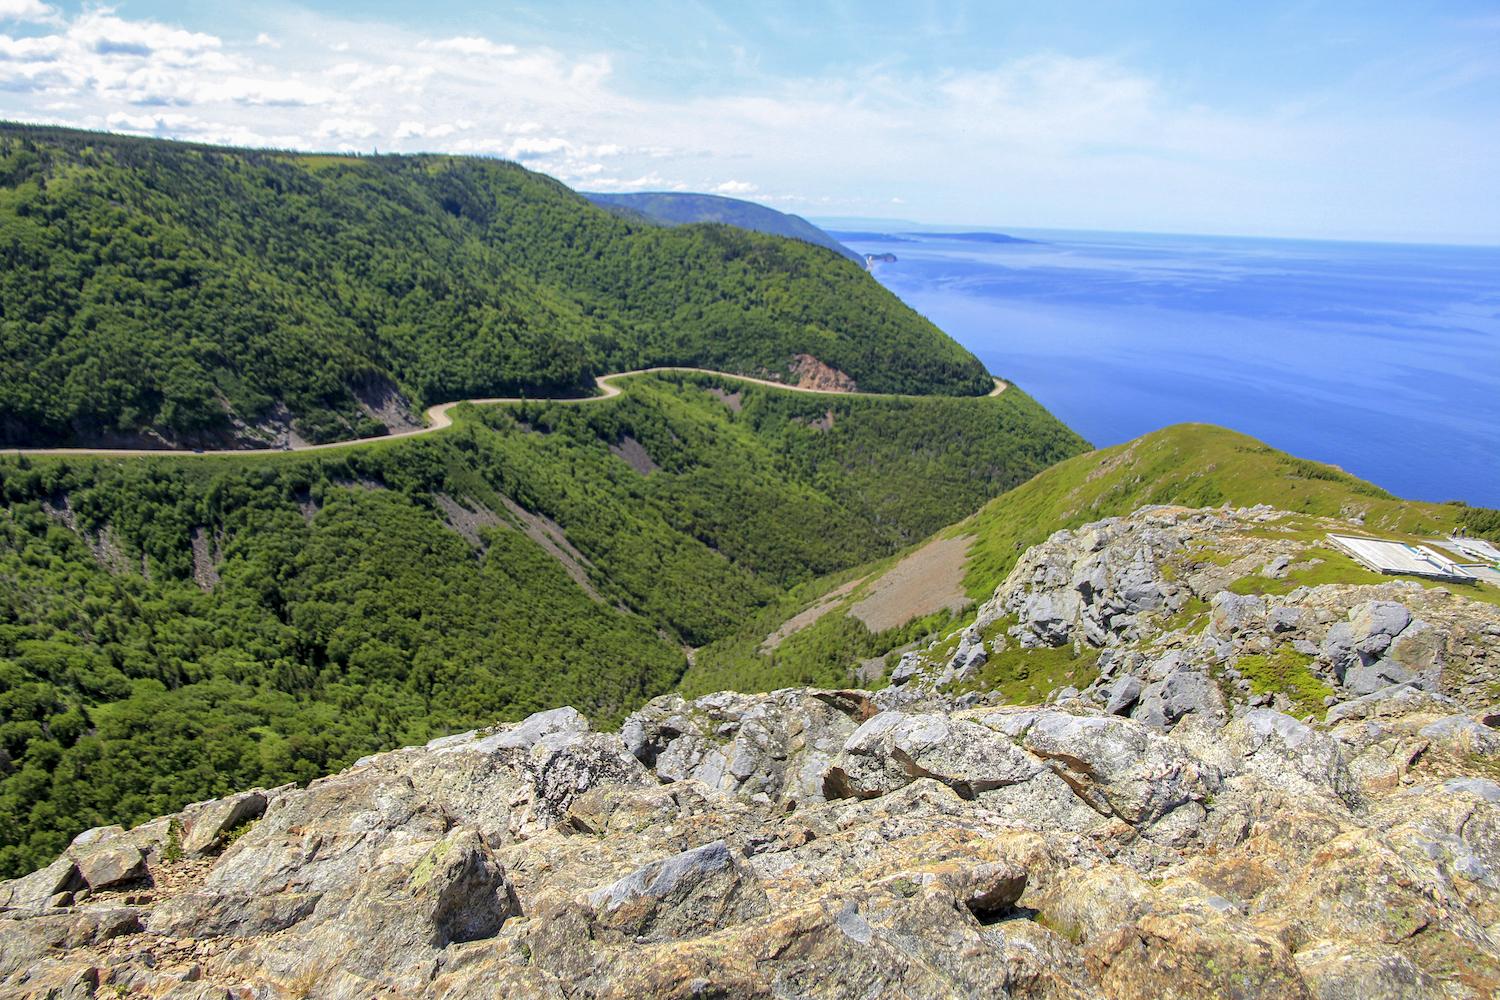 The Cabot Trail wraps Cape Breton Highlands National Park and offers sweeping views of the ocean, but never really penetrates the park's interior/Parks Canada, Alaïs Nevert